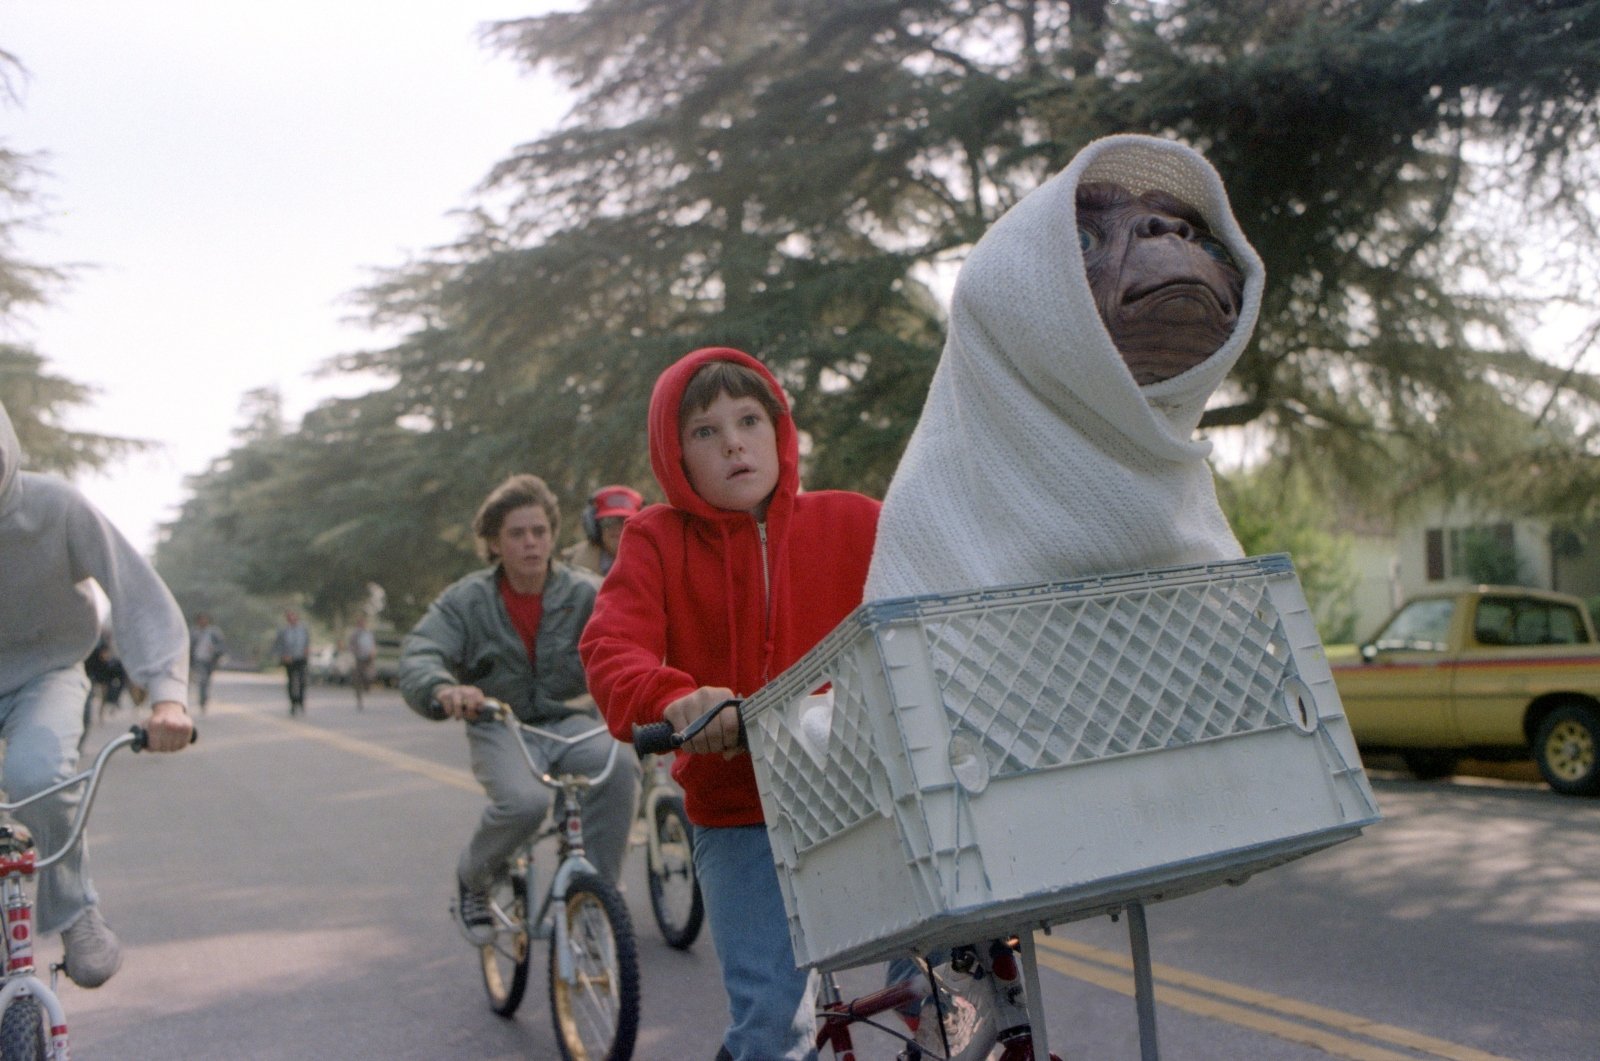 Steven Spielberg's 'E.T. the Extra-Terrestrial' with Henry Thomas